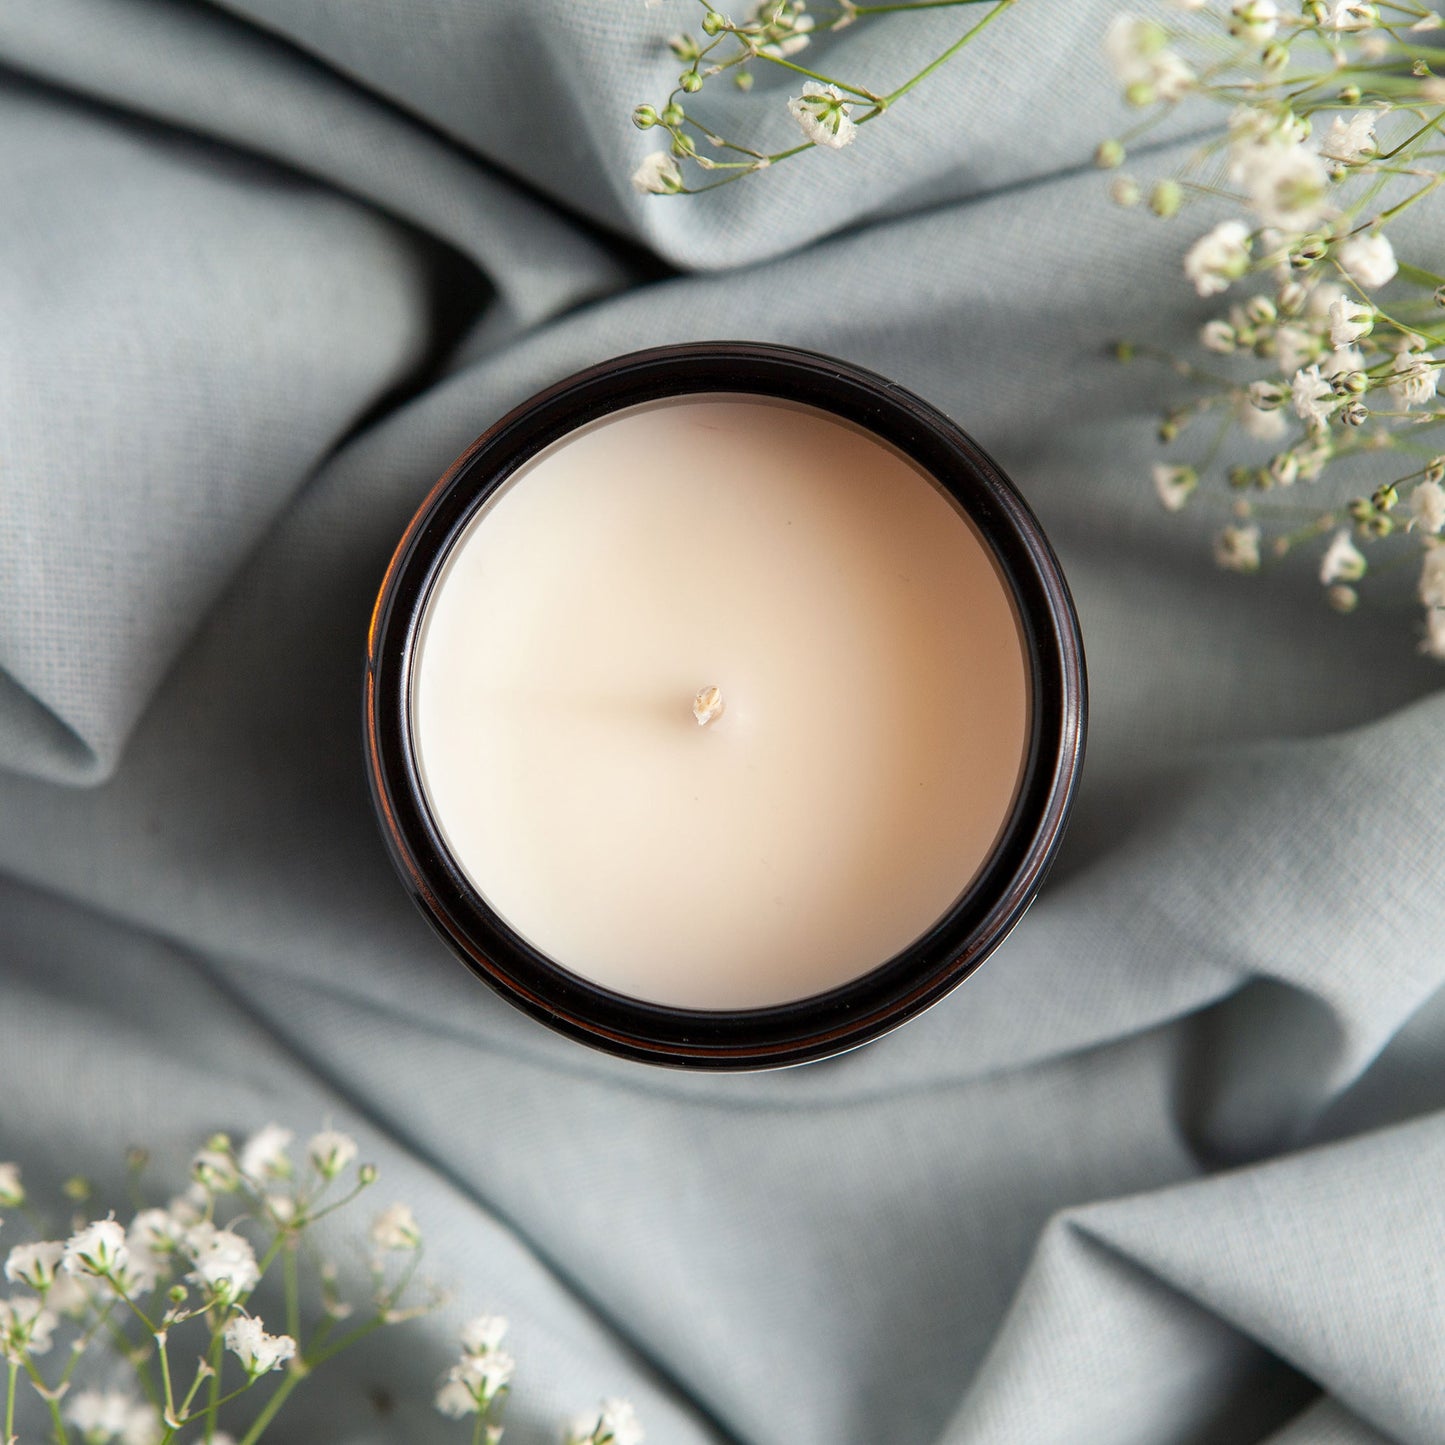 Stocking Filler for Her Candle Baby It's Cold Outside - Kindred Fires